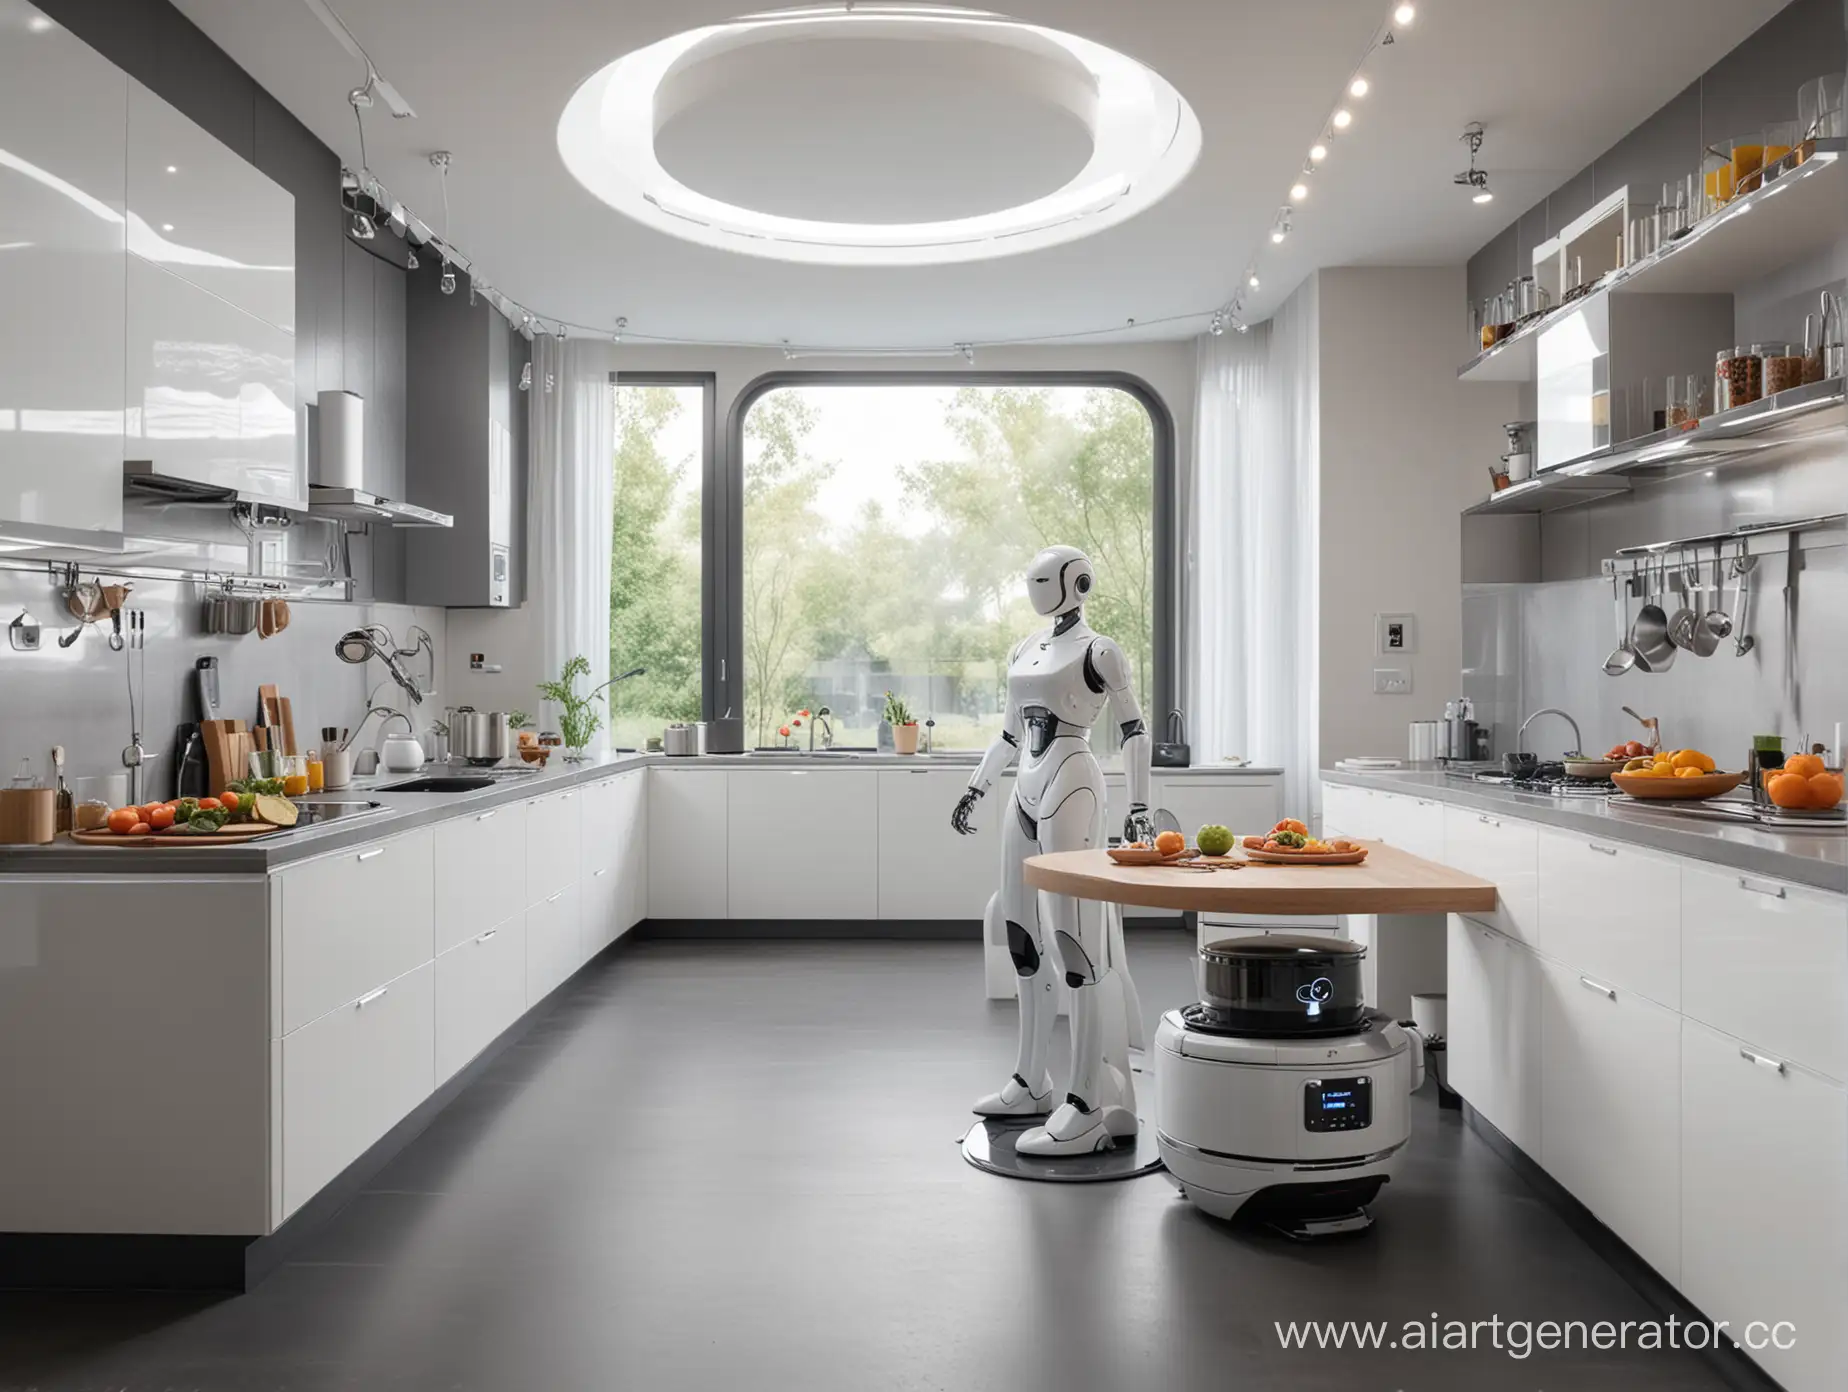 The interior of the kitchen of the future with round robot cooks and housewives